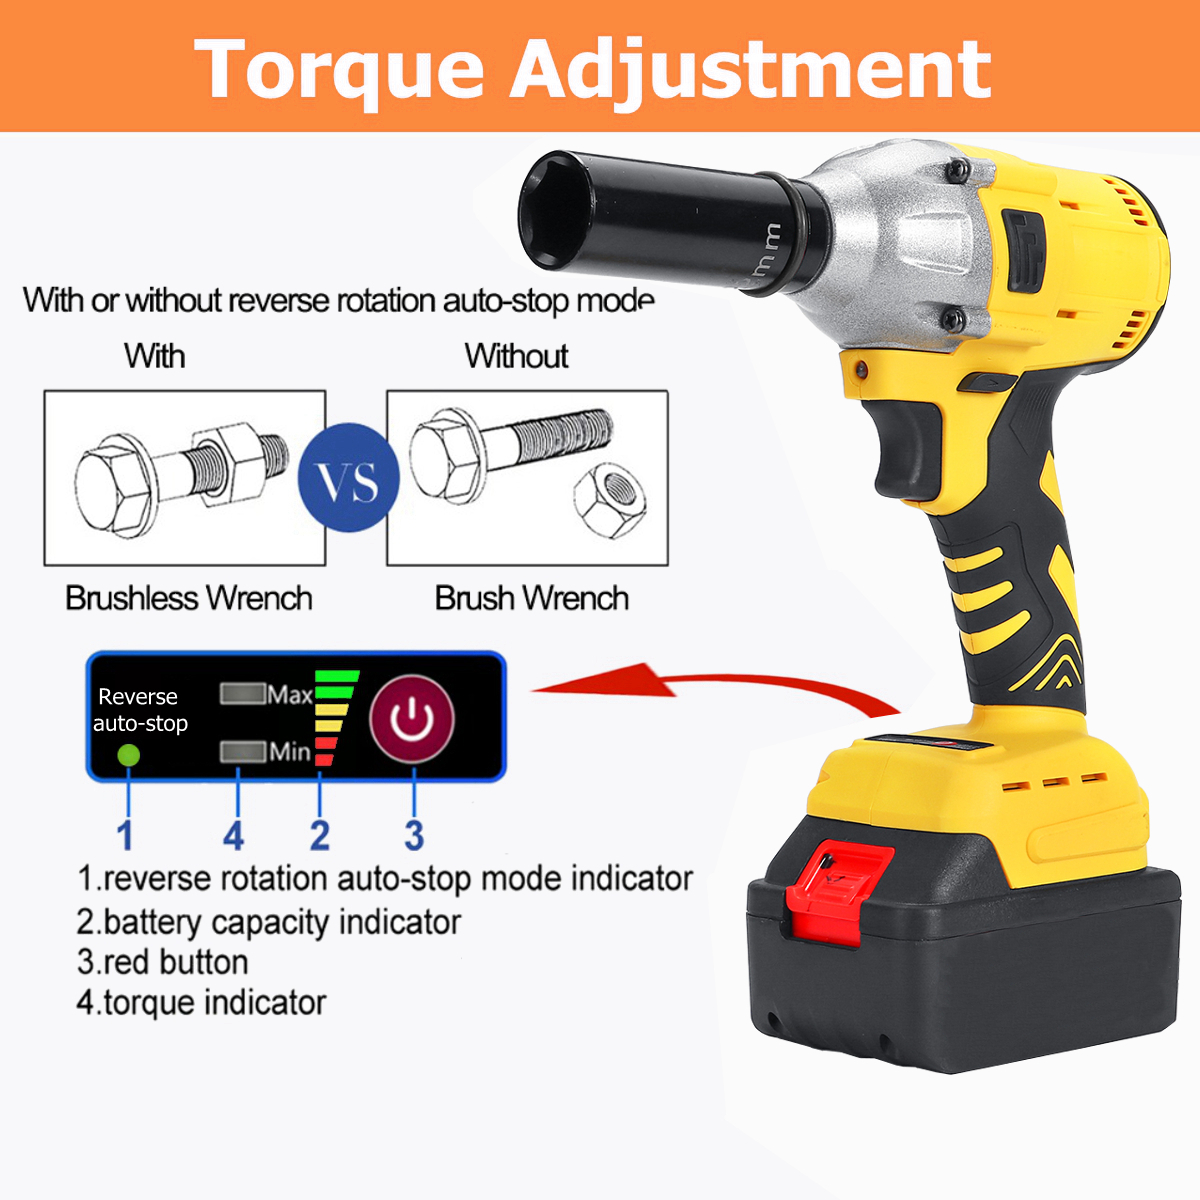 12-Cordless-Brushless-Impact-Wrench-Brushless-Motor-Power-Driver-Electric-Wrench-with-2-Battery-1807111-14